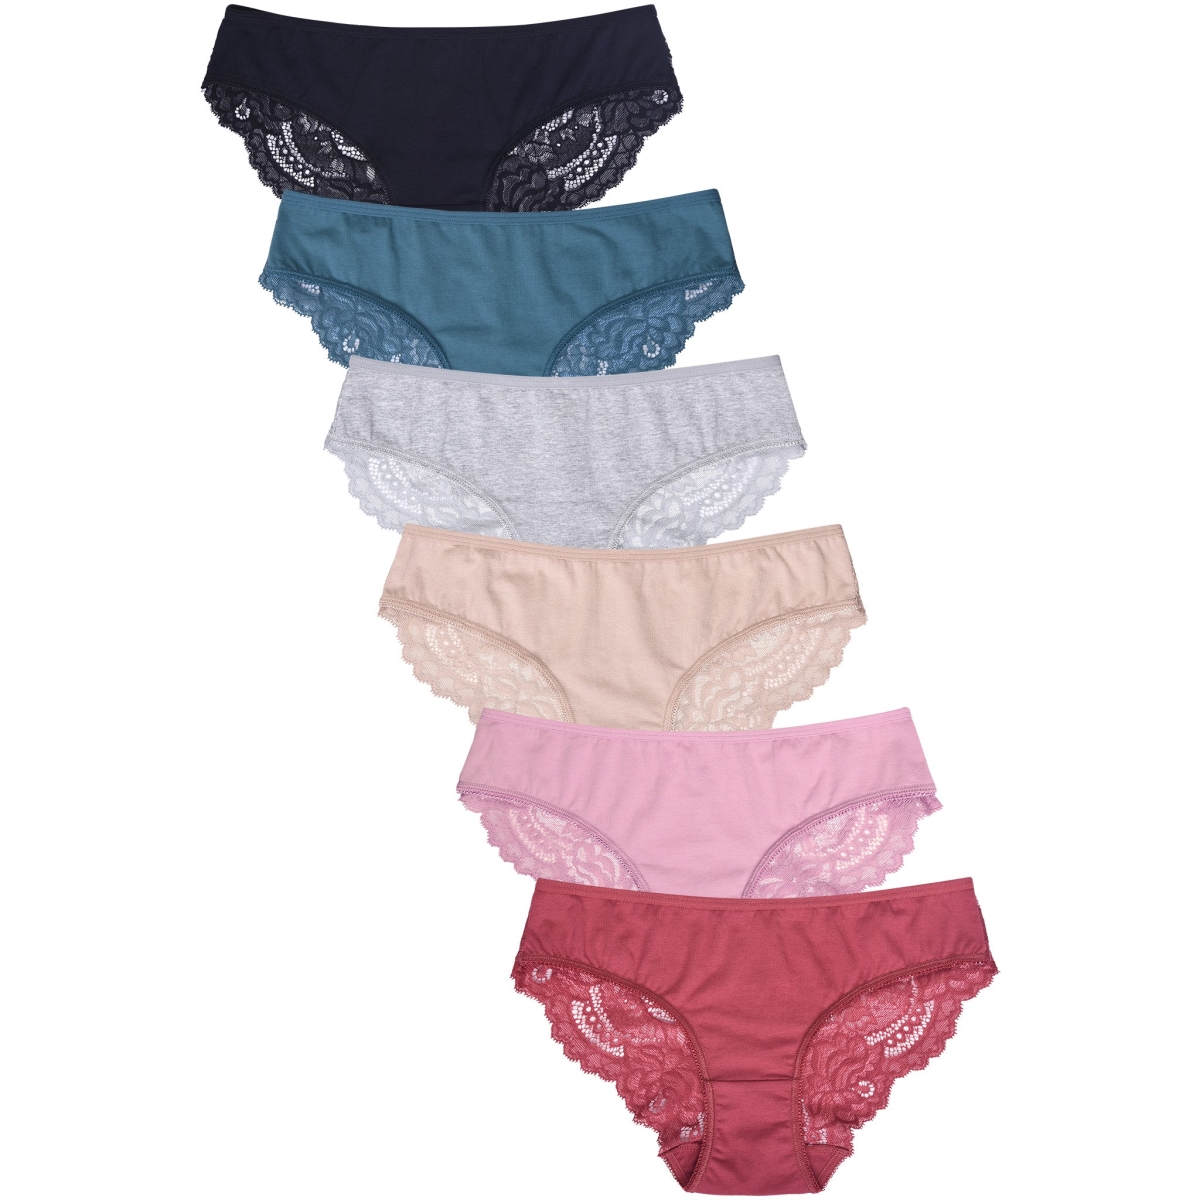 Picture of 247 Frenzy 247-LP1402CK2-LG Sofra Womens Essentials Cotton Stretch Bikini Panty Underwear - Assorted Color - Large - Pack of 6